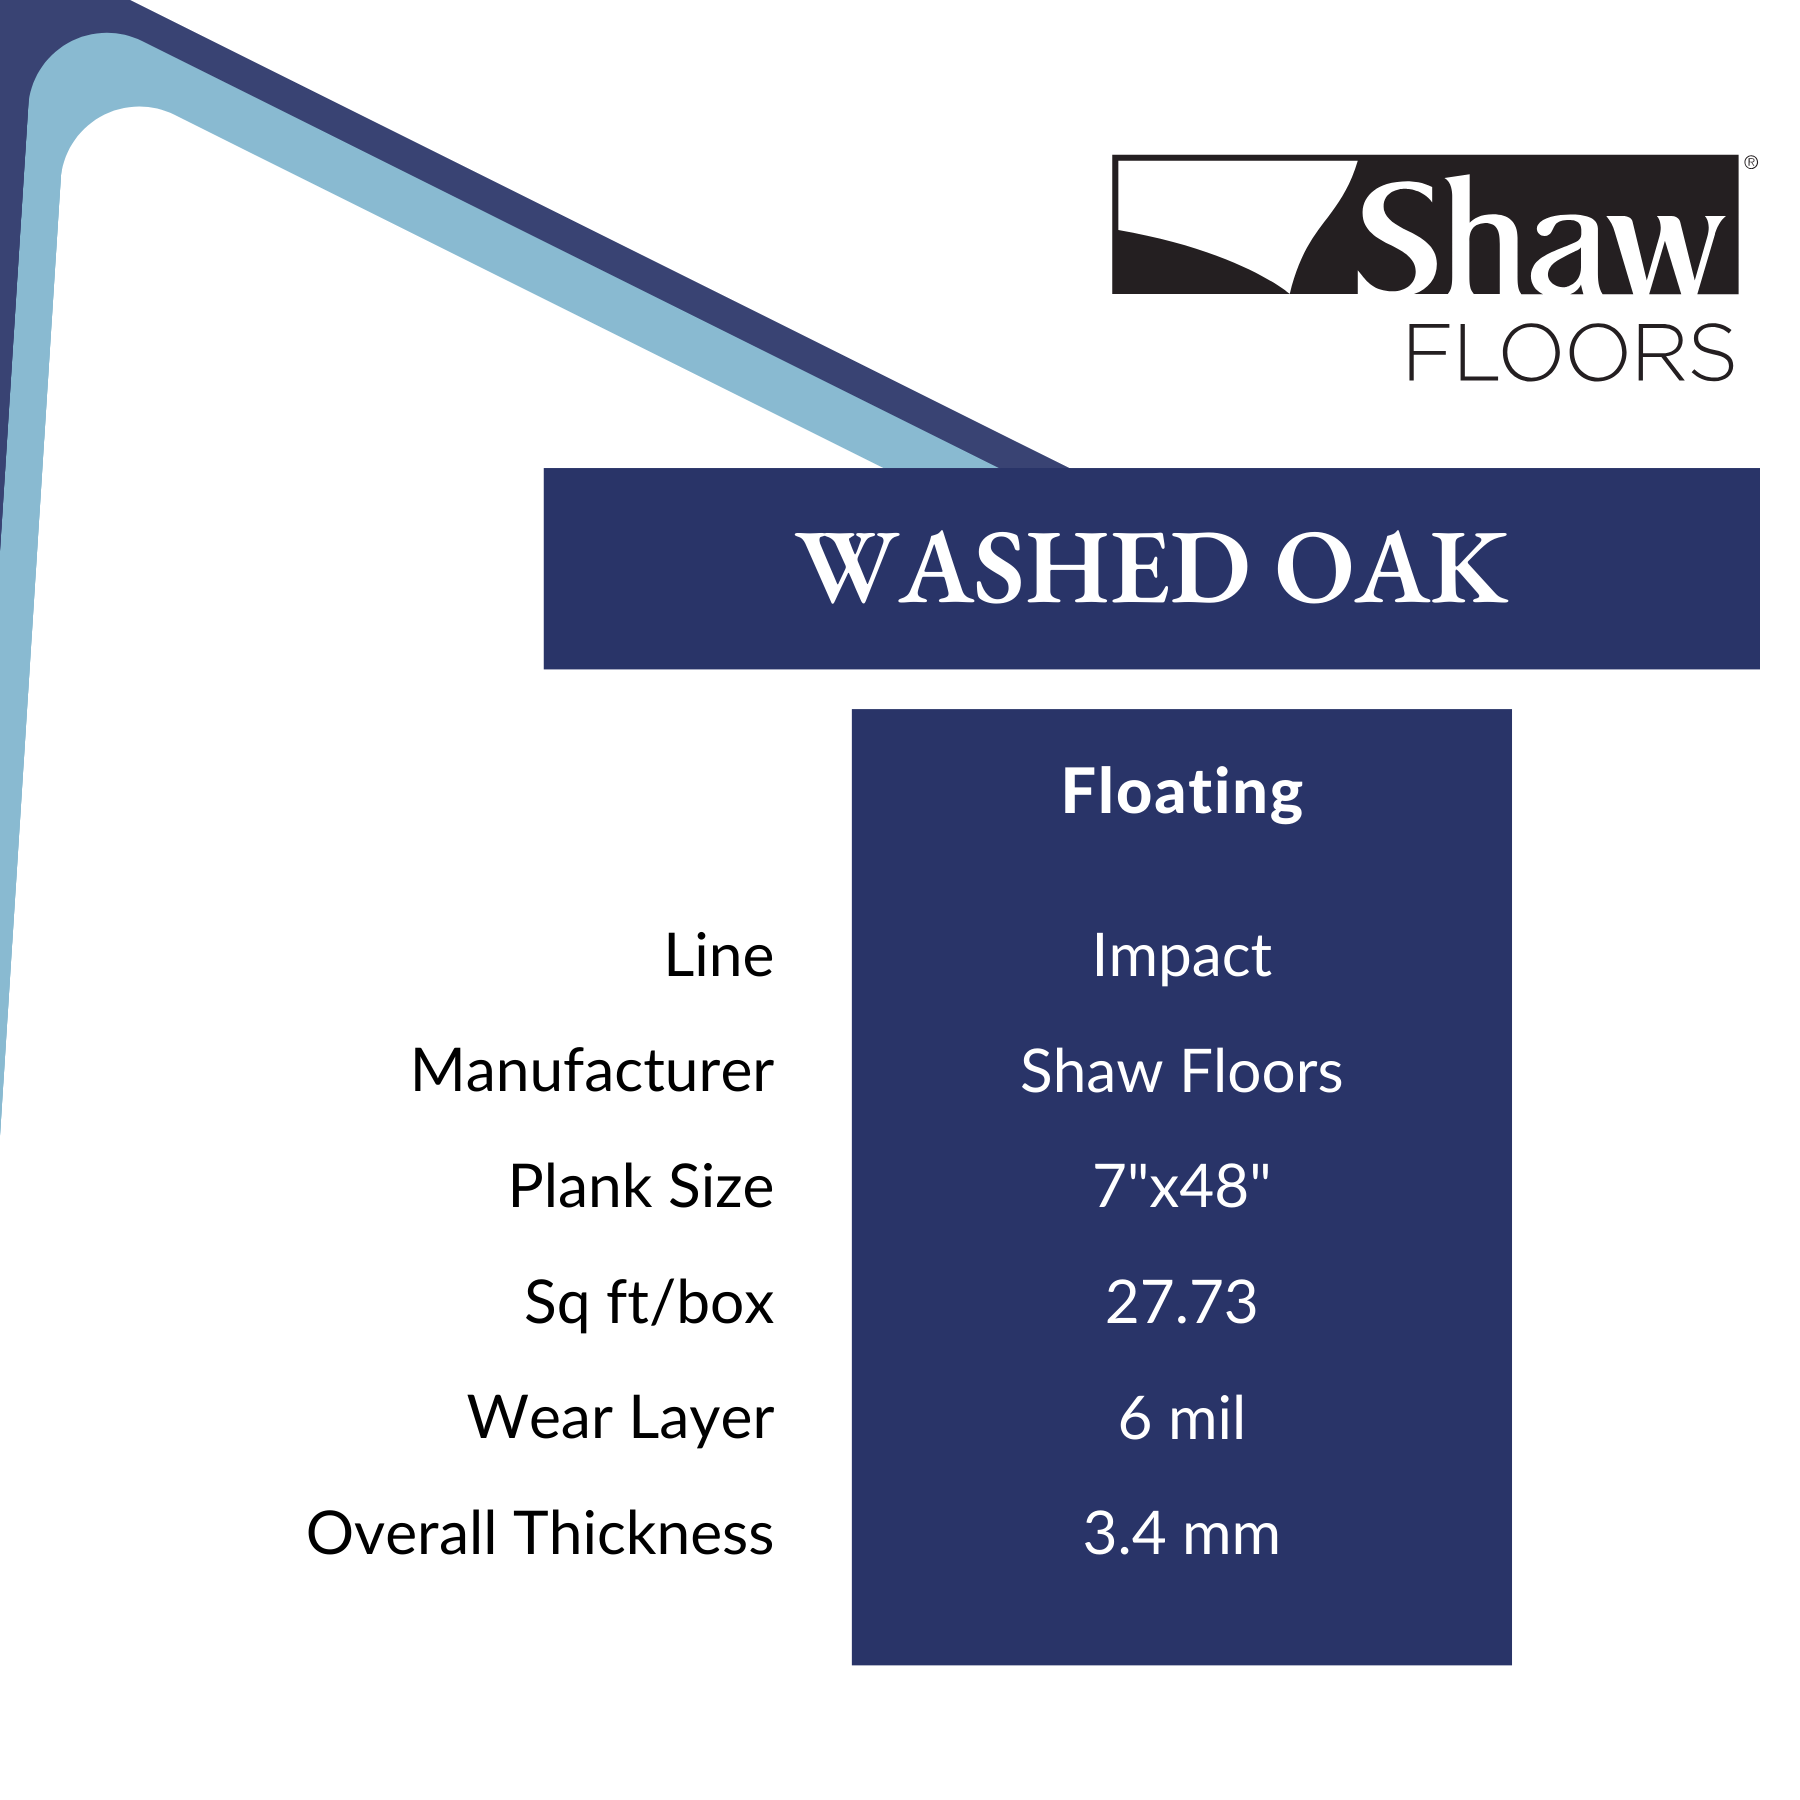 Washed Oak by Shaw, Clearance at Calhoun's in Springfield, IL Specs